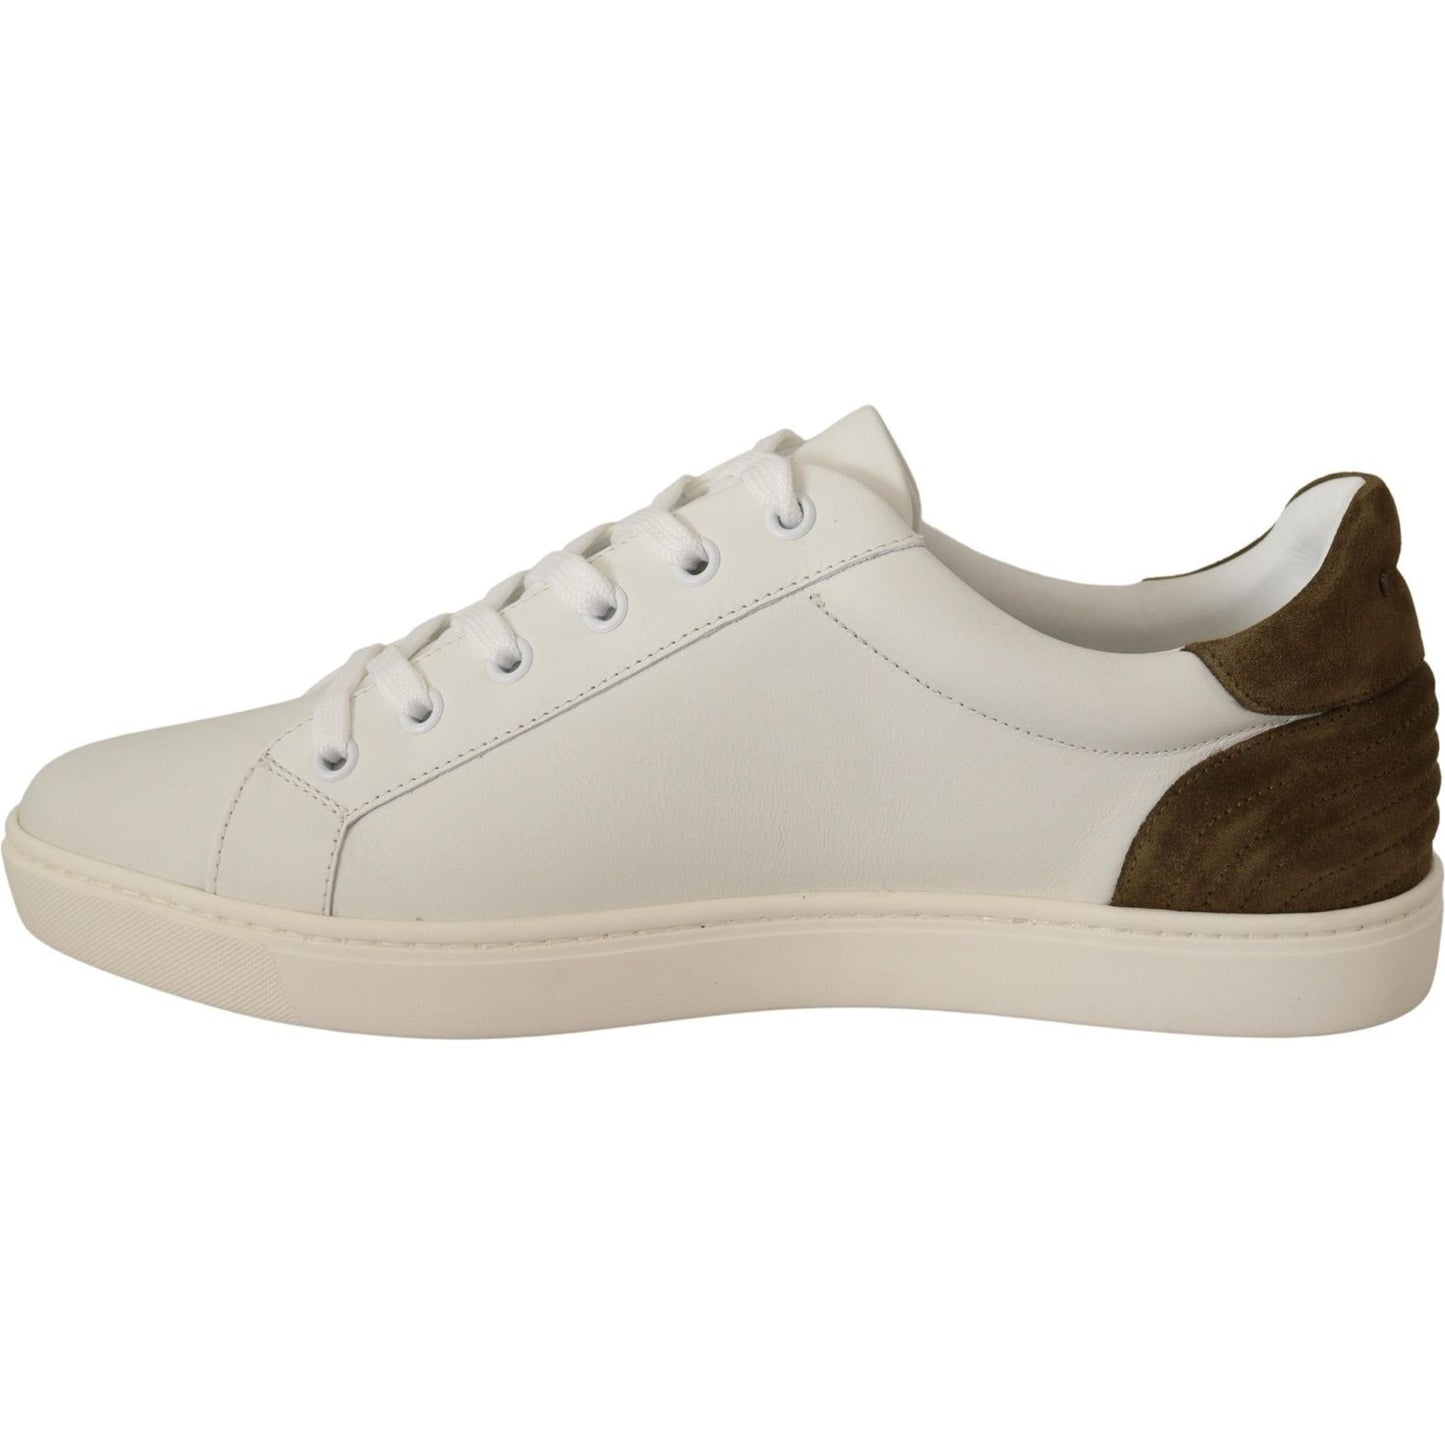 Dolce & Gabbana Chic White Leather Sneakers for Men white-suede-leather-mens-low-tops-sneakers